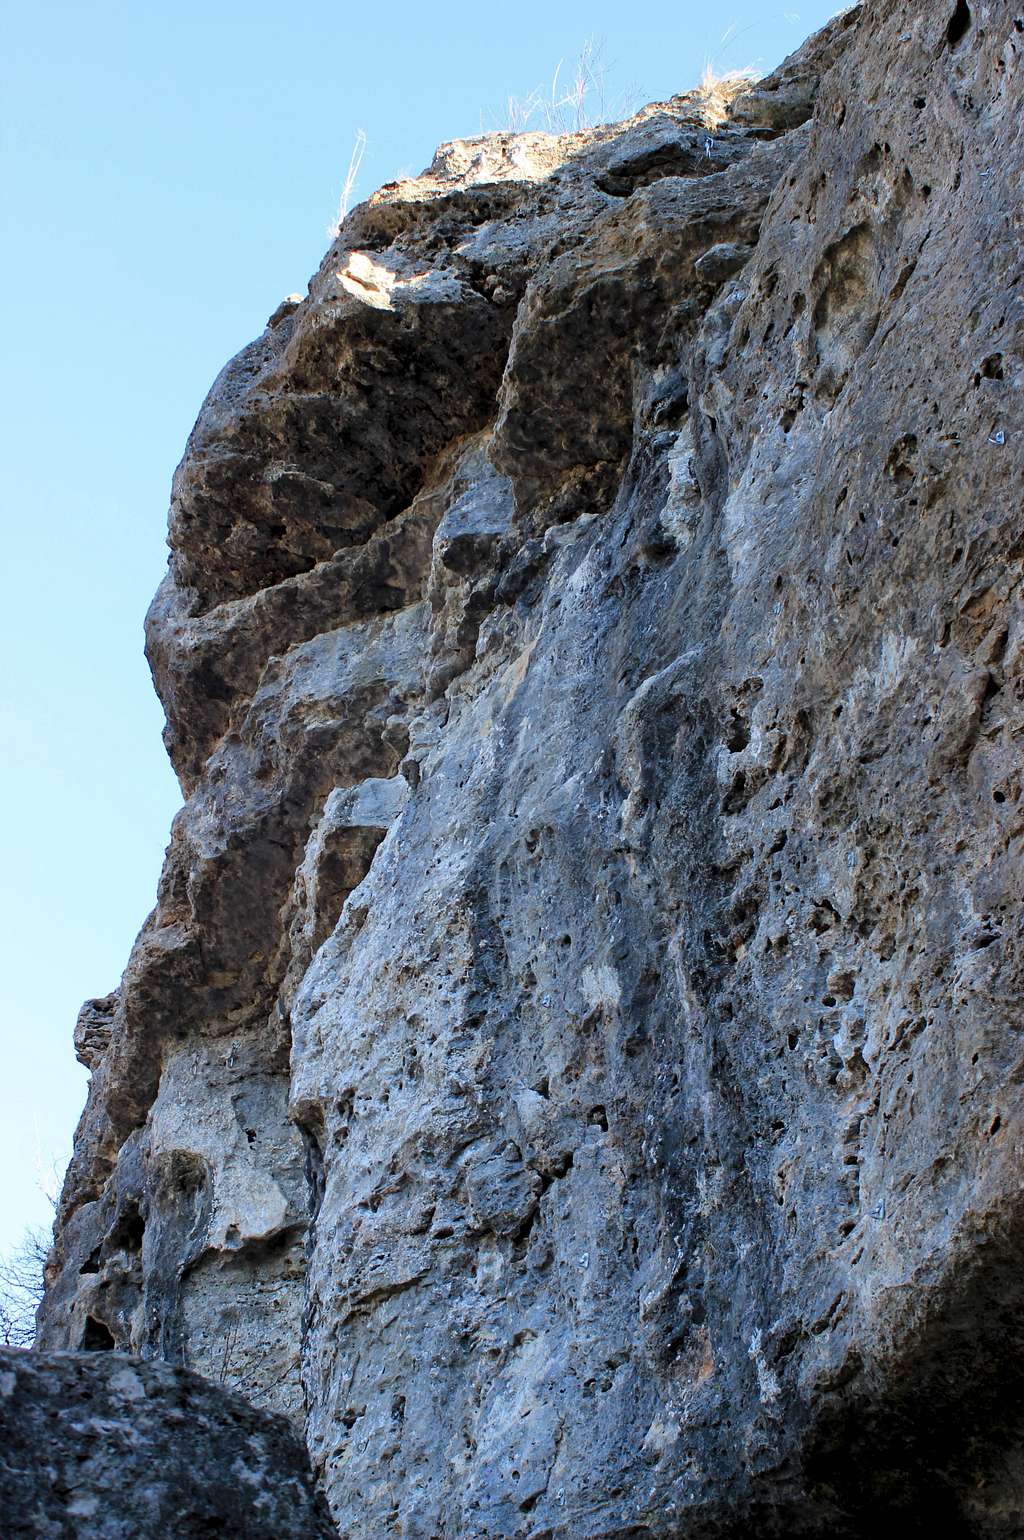 Dwarves Rule (5.10d) and Orcs Drool (5.10a)